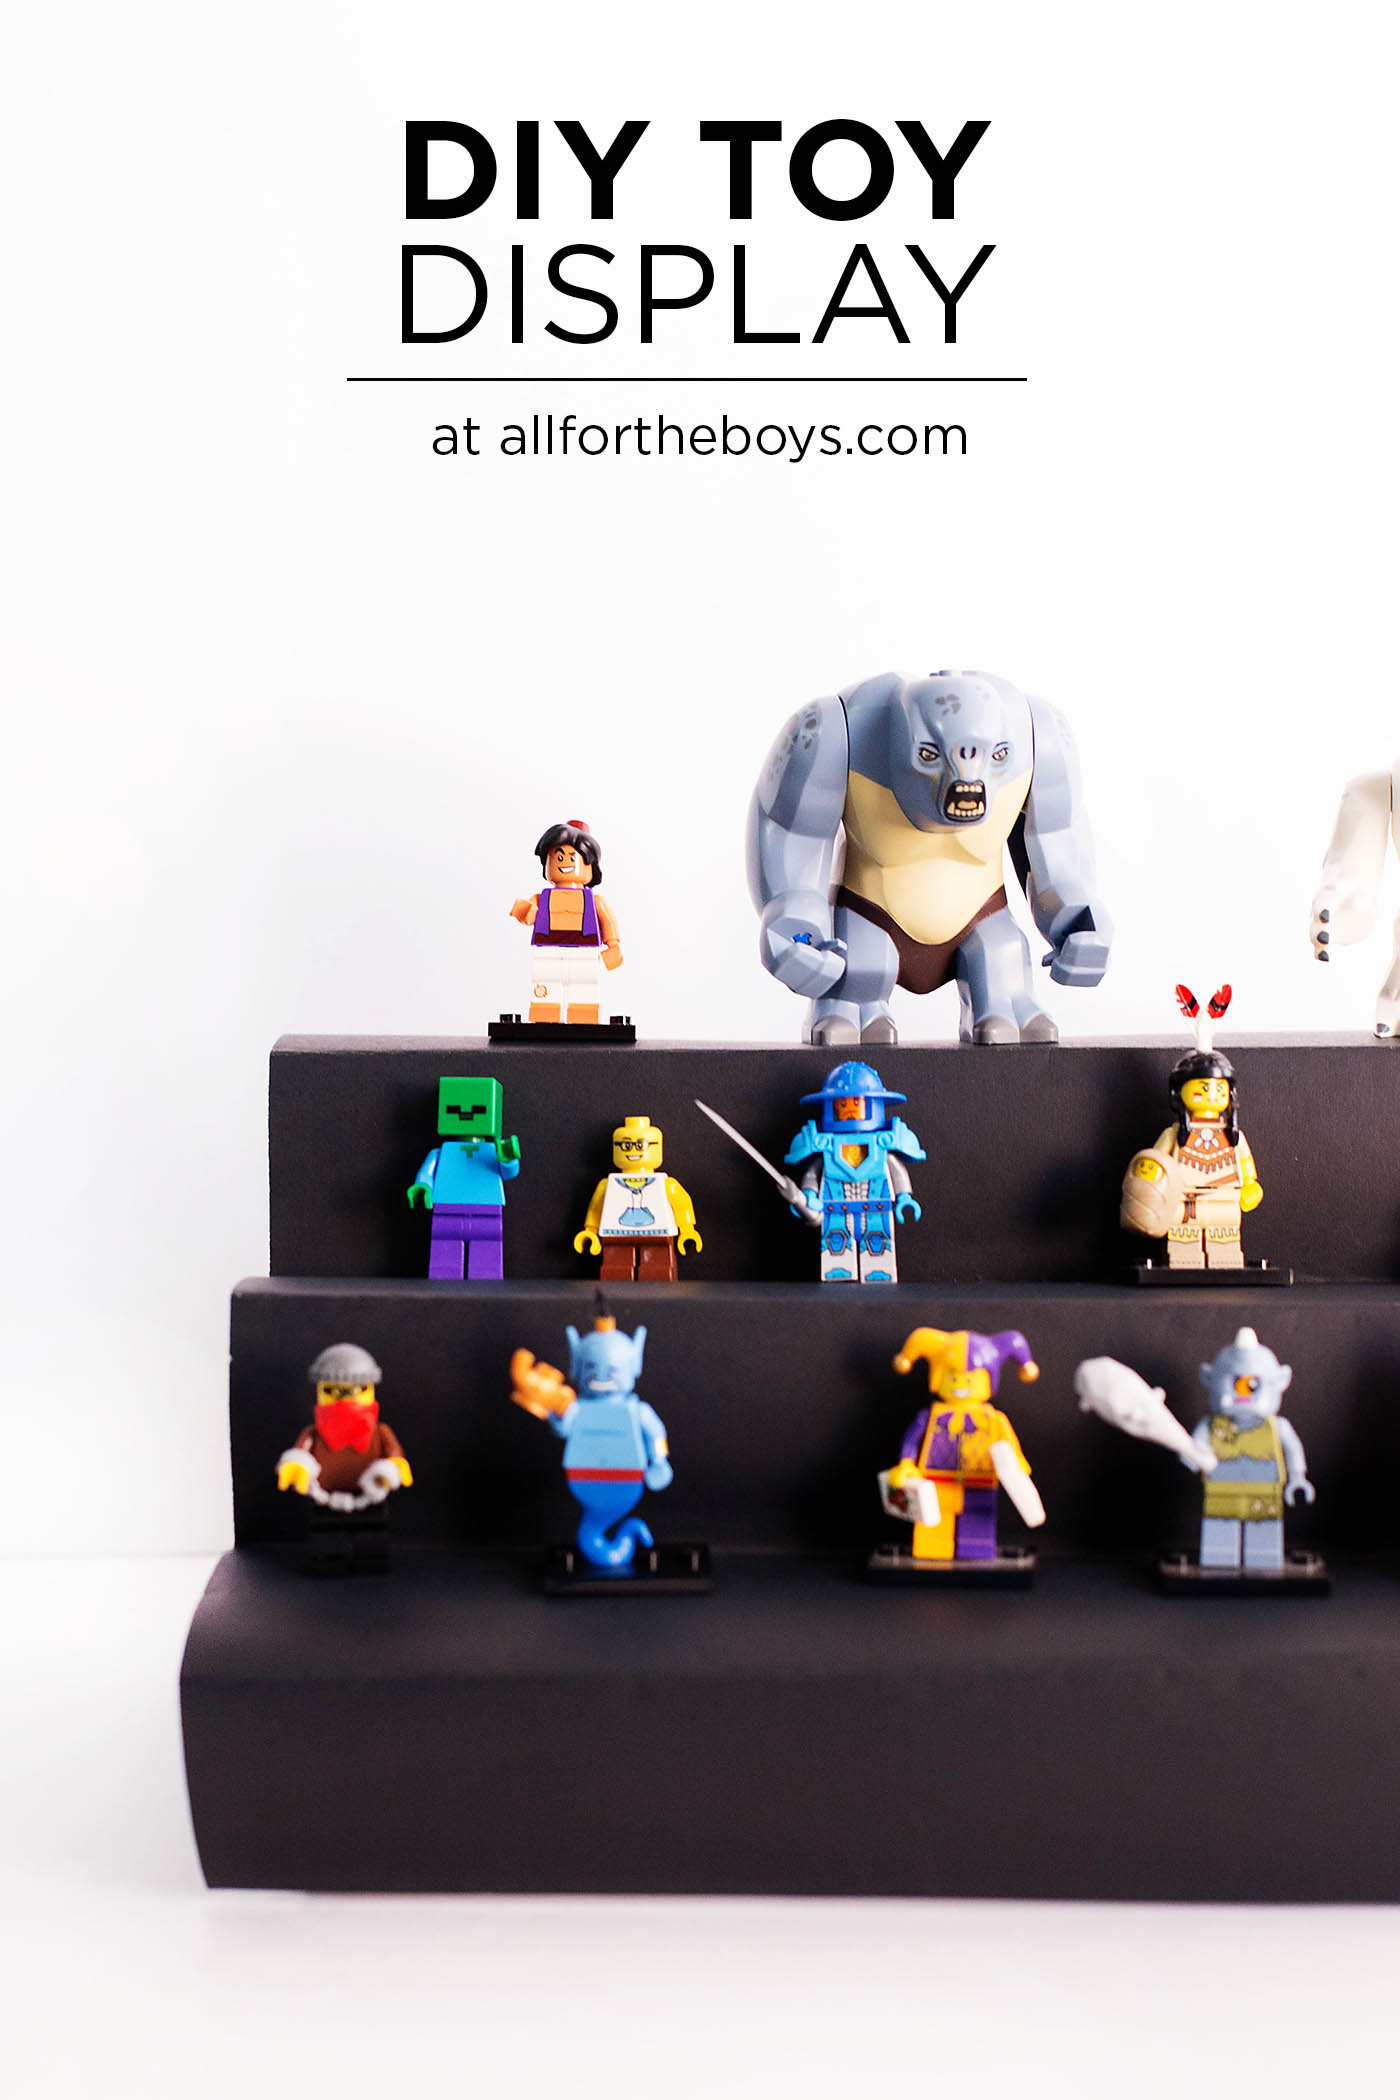 DIY toy display stand